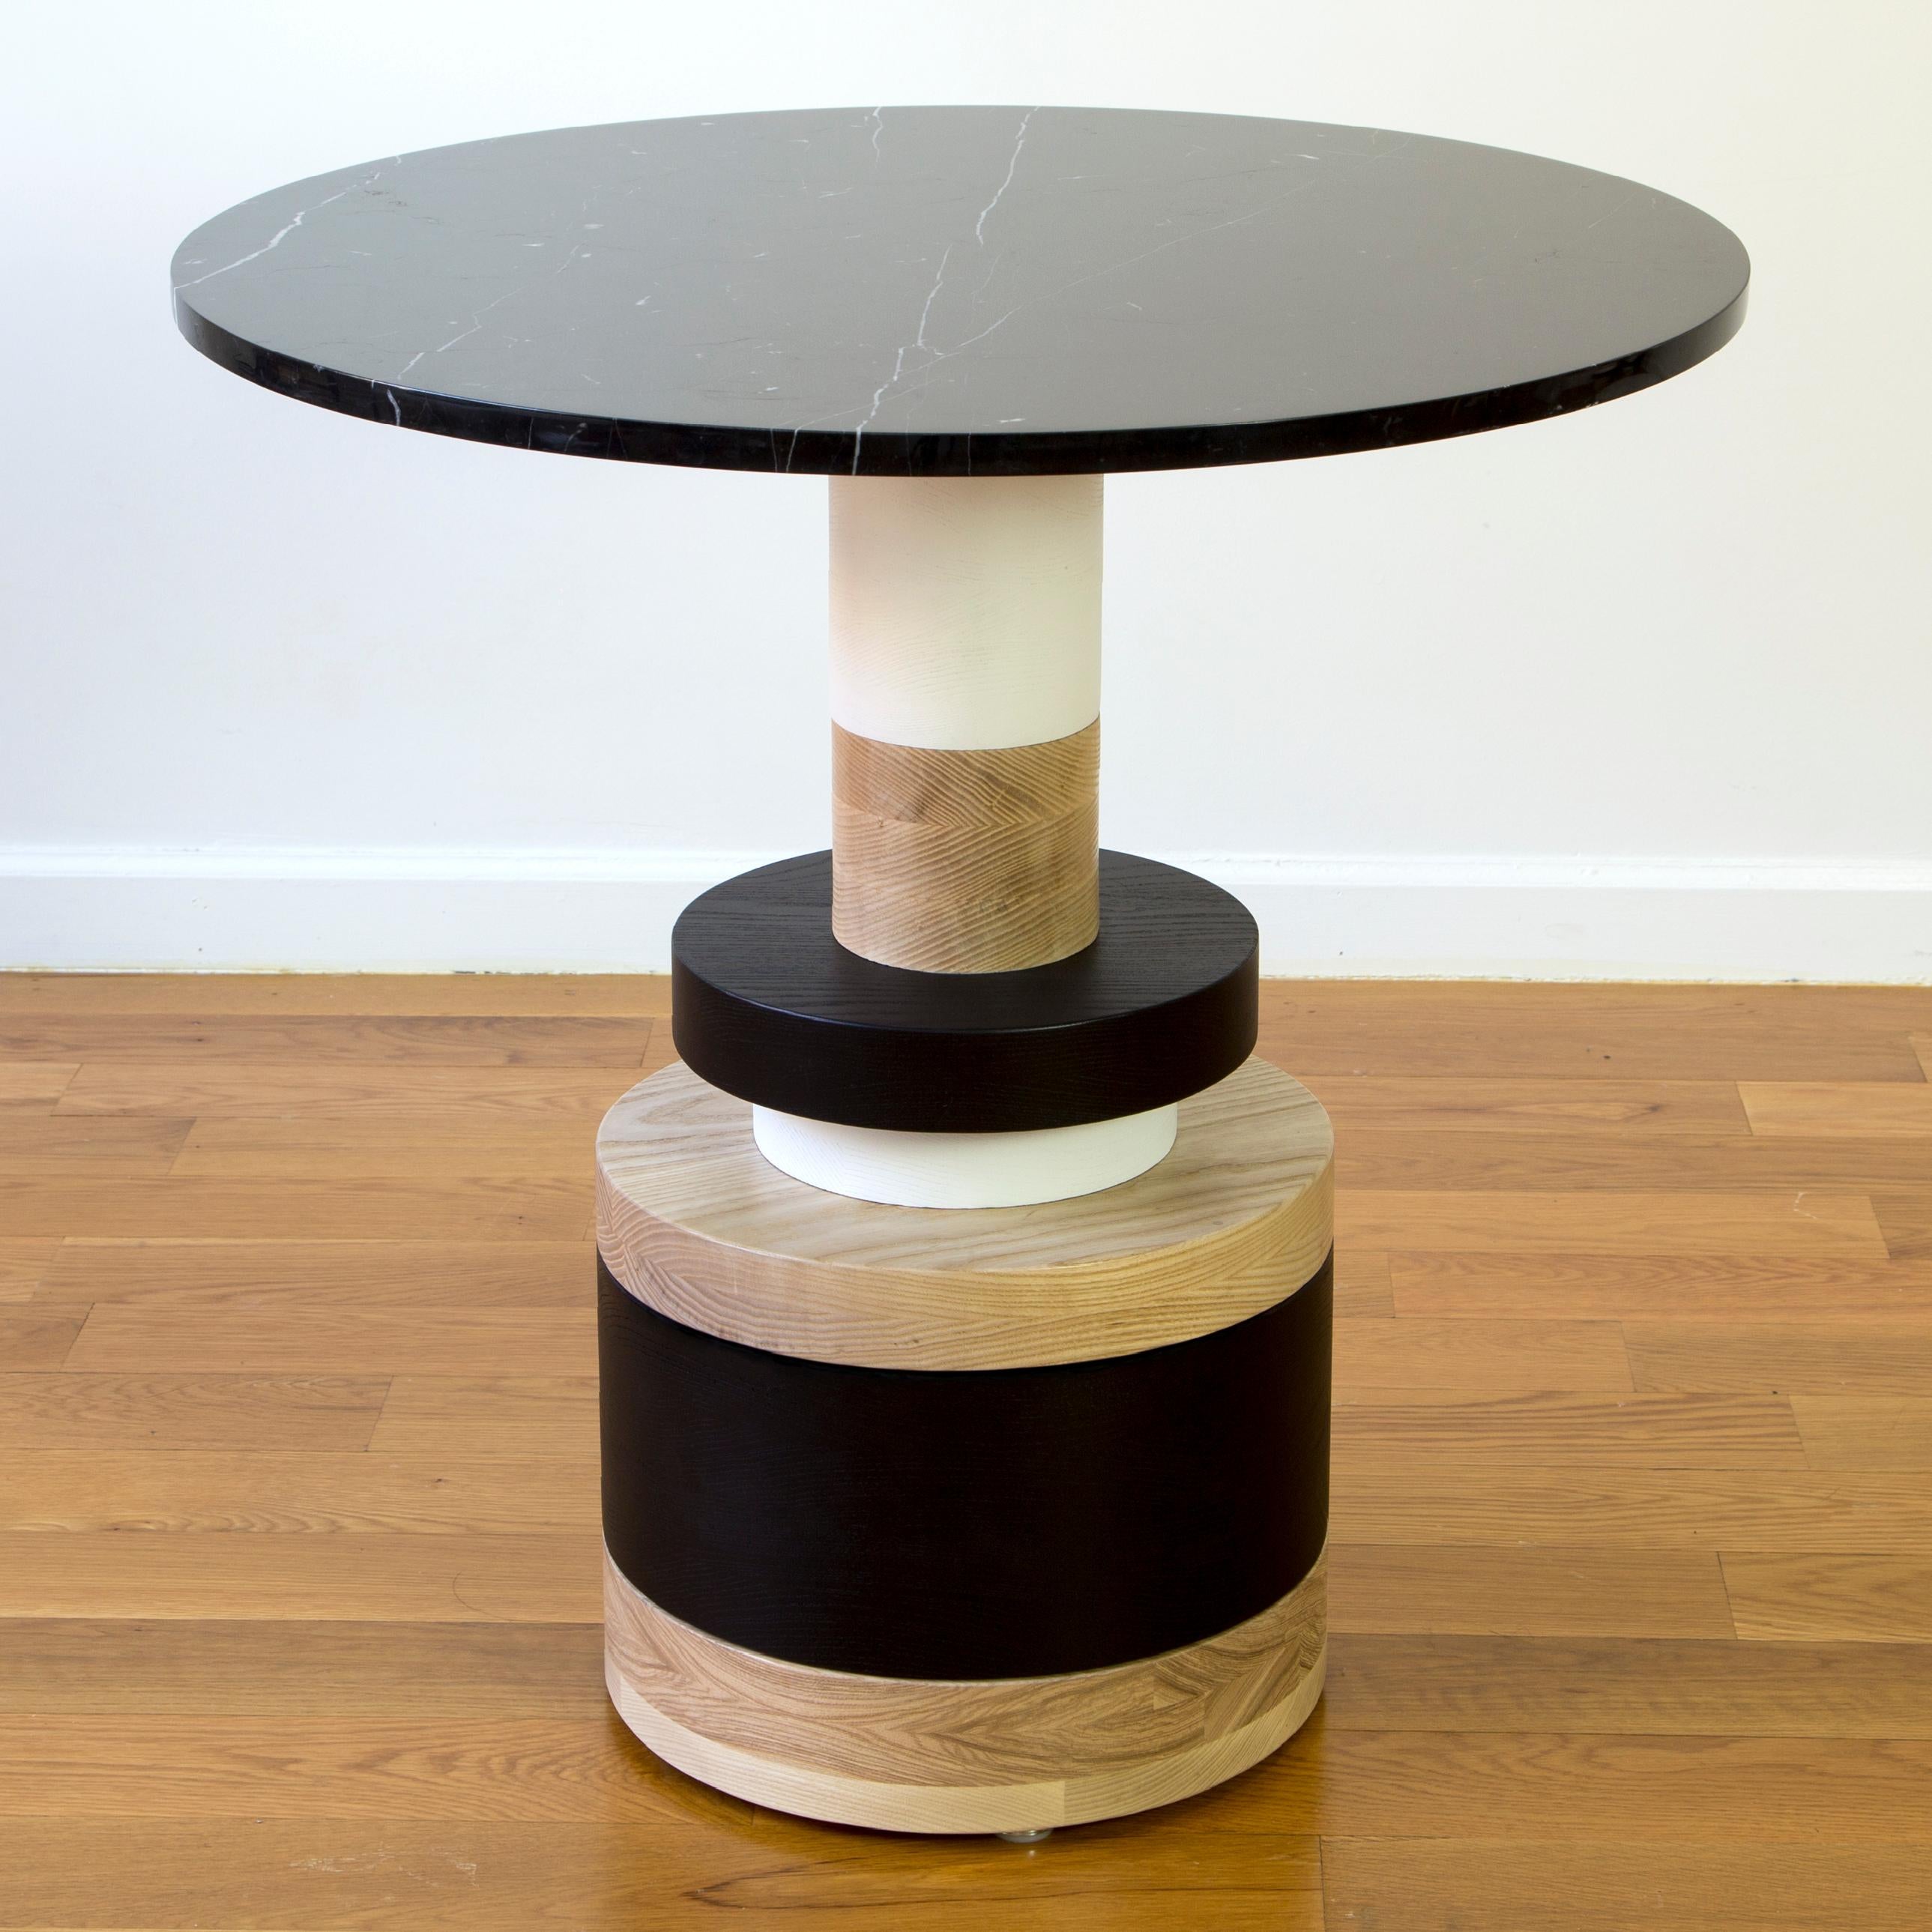 The Sottsass-inspired “Sass Dining Table” is a bold, graphic statement piece. A honed Carrara marble top sits on an Amish-made base composed of painted and stacked wood circles. Made to order.

The version as shown is 36